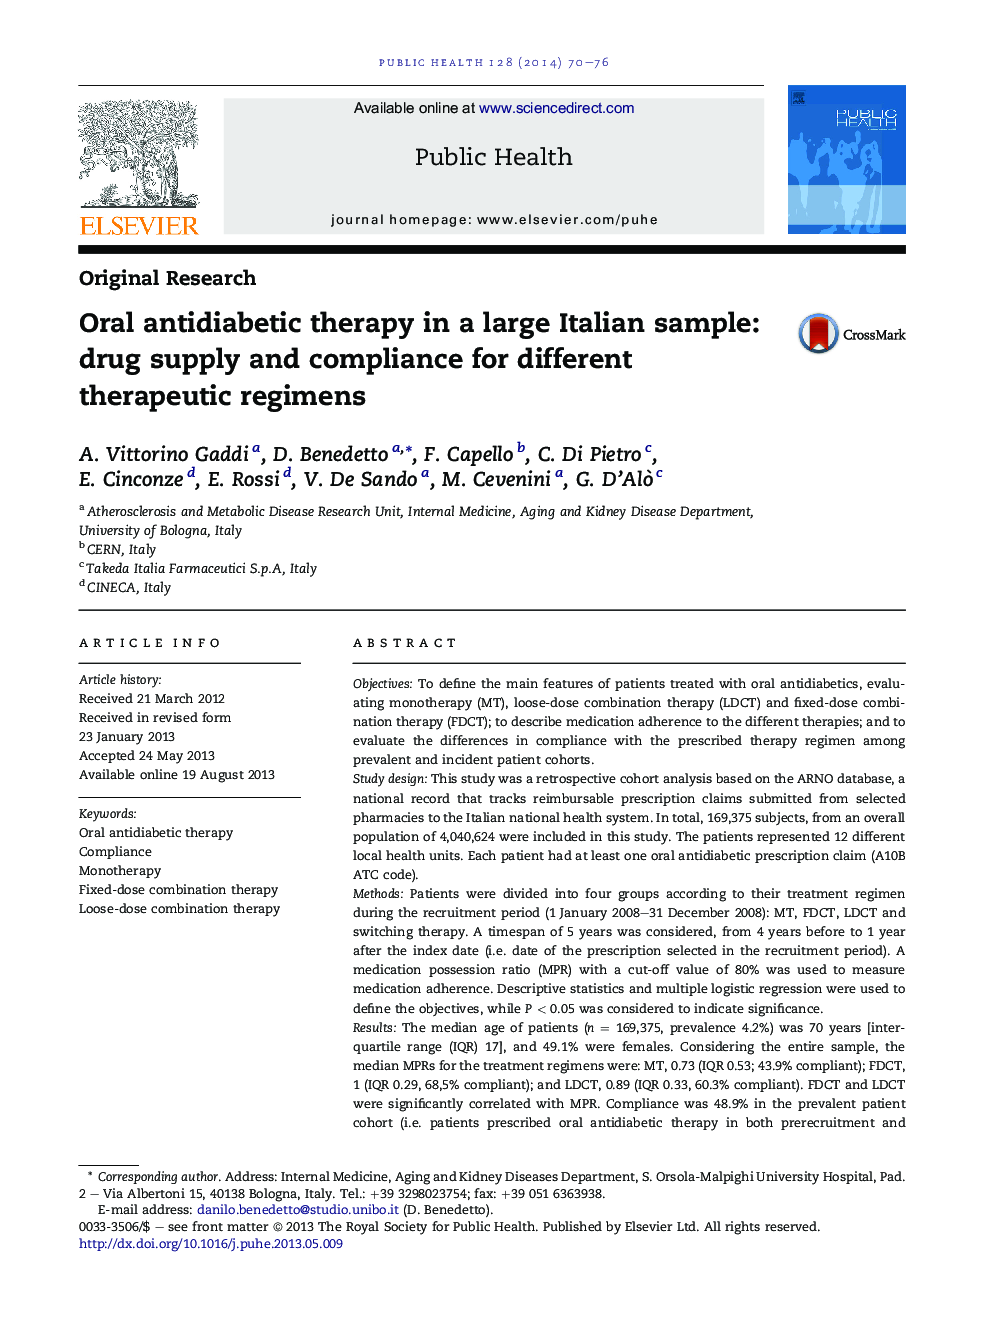 Oral antidiabetic therapy in a large Italian sample: drug supply and compliance for different therapeutic regimens